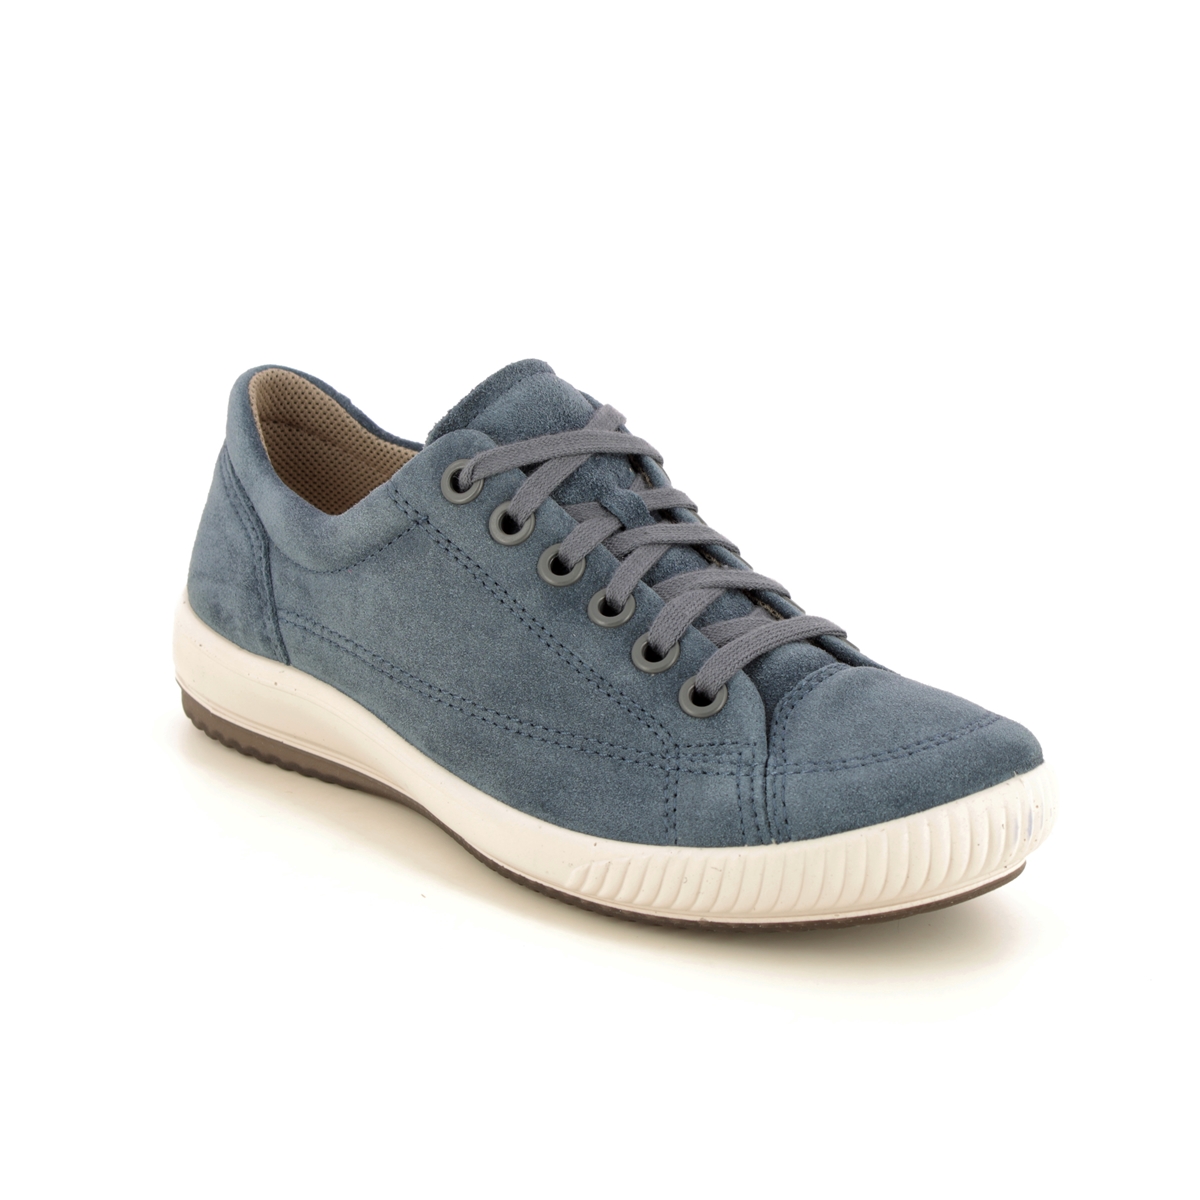 Legero Tanaro 5 Stitch Blue Suede Womens Lacing Shoes 2000161-8600 In Size 9 In Plain Blue Suede